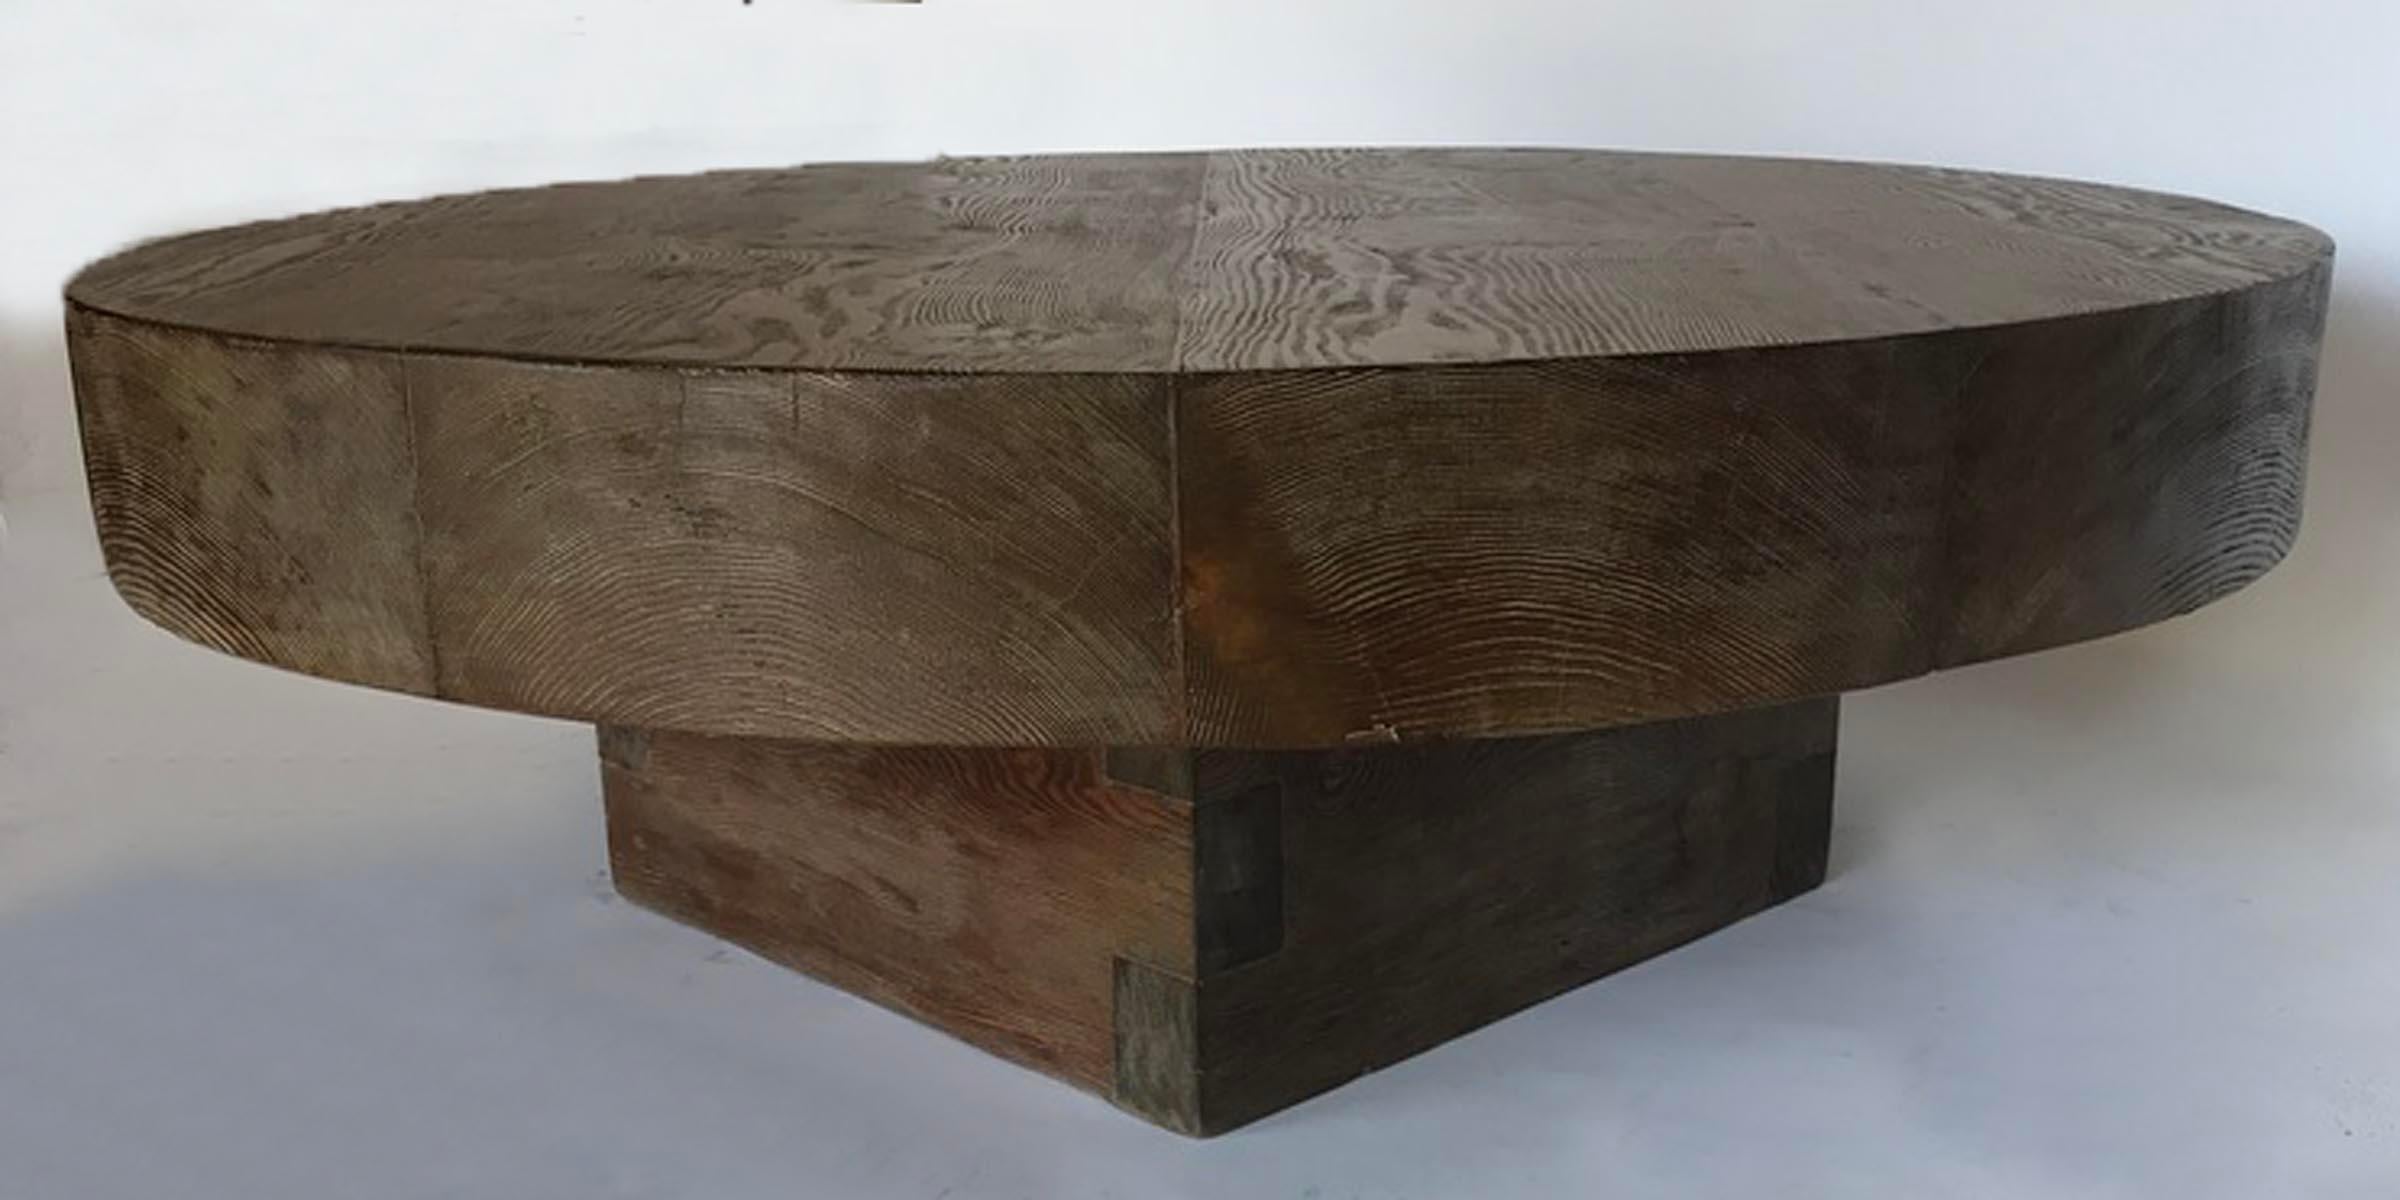 Rustic modern coffee table made in reclaimed 5 inch thick Douglas fir. Square dovetailed base. One of a kind. Finish shows knots and natural distress of the wood. Smooth finish with nice patina.
 Shown here in our 